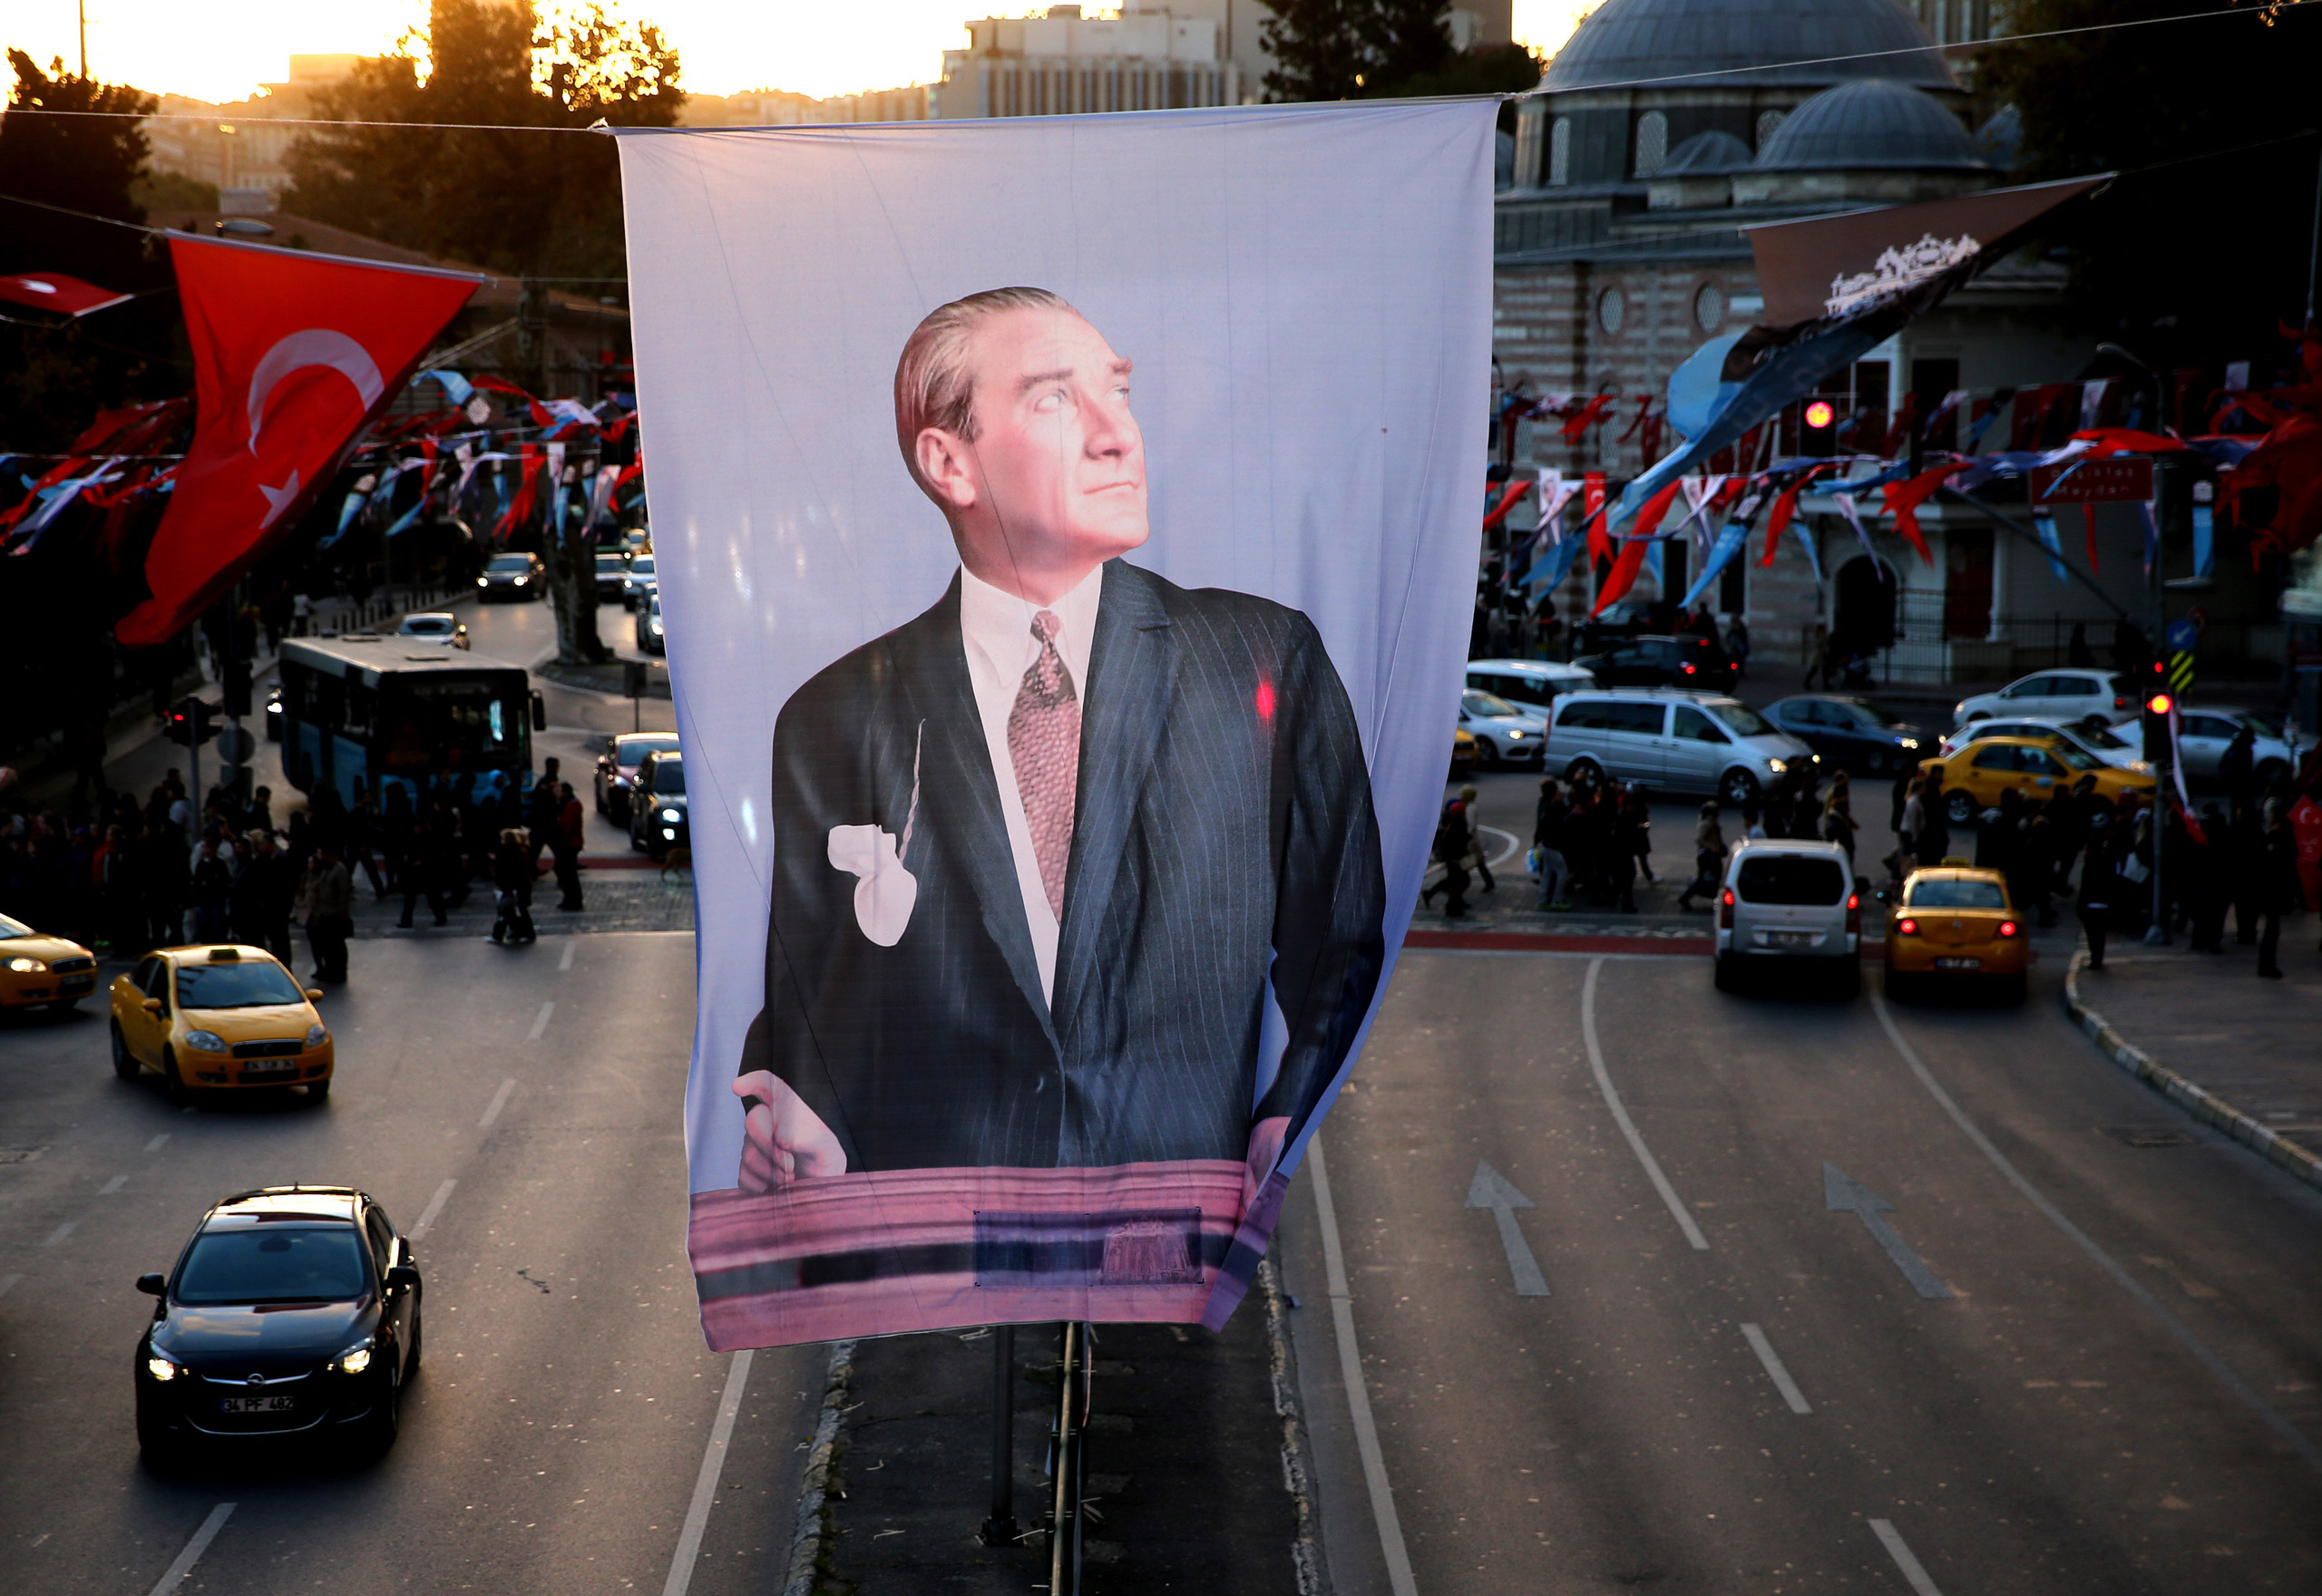 A portrait flag of the Turkish Republic founder Mustafa Kemal Ataturk hangs in Besiktas square, in Istanbul, Saturday, Oct. 31, 2015. Turkish political parties are making their closing appeals ahead of Sunday Nov. 1 crucial parliamentary vote. The election is a redo of June elections in which the ruling Justice and Development Party, or AKP, lost its majority after 13 years of single-party rule.(AP Photo/Hussein Malla)